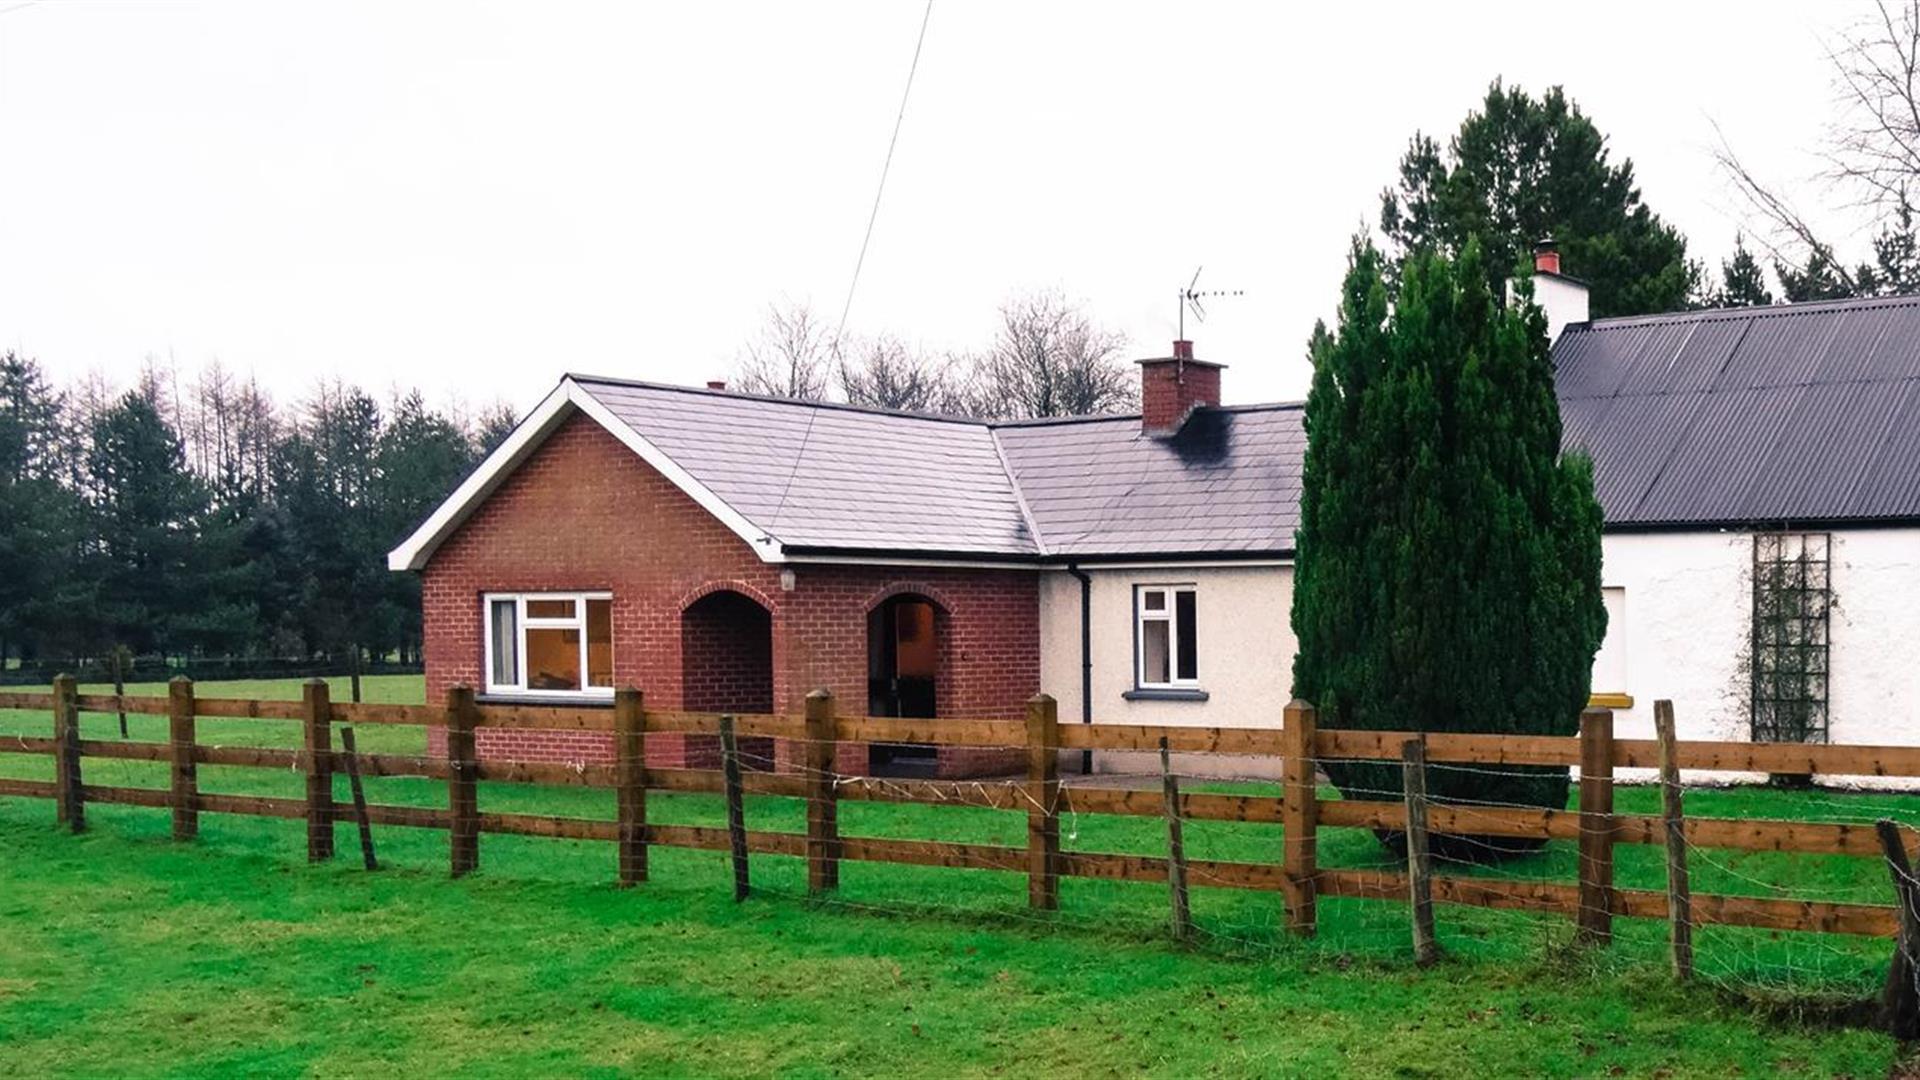 Outside image of house with wooden fence